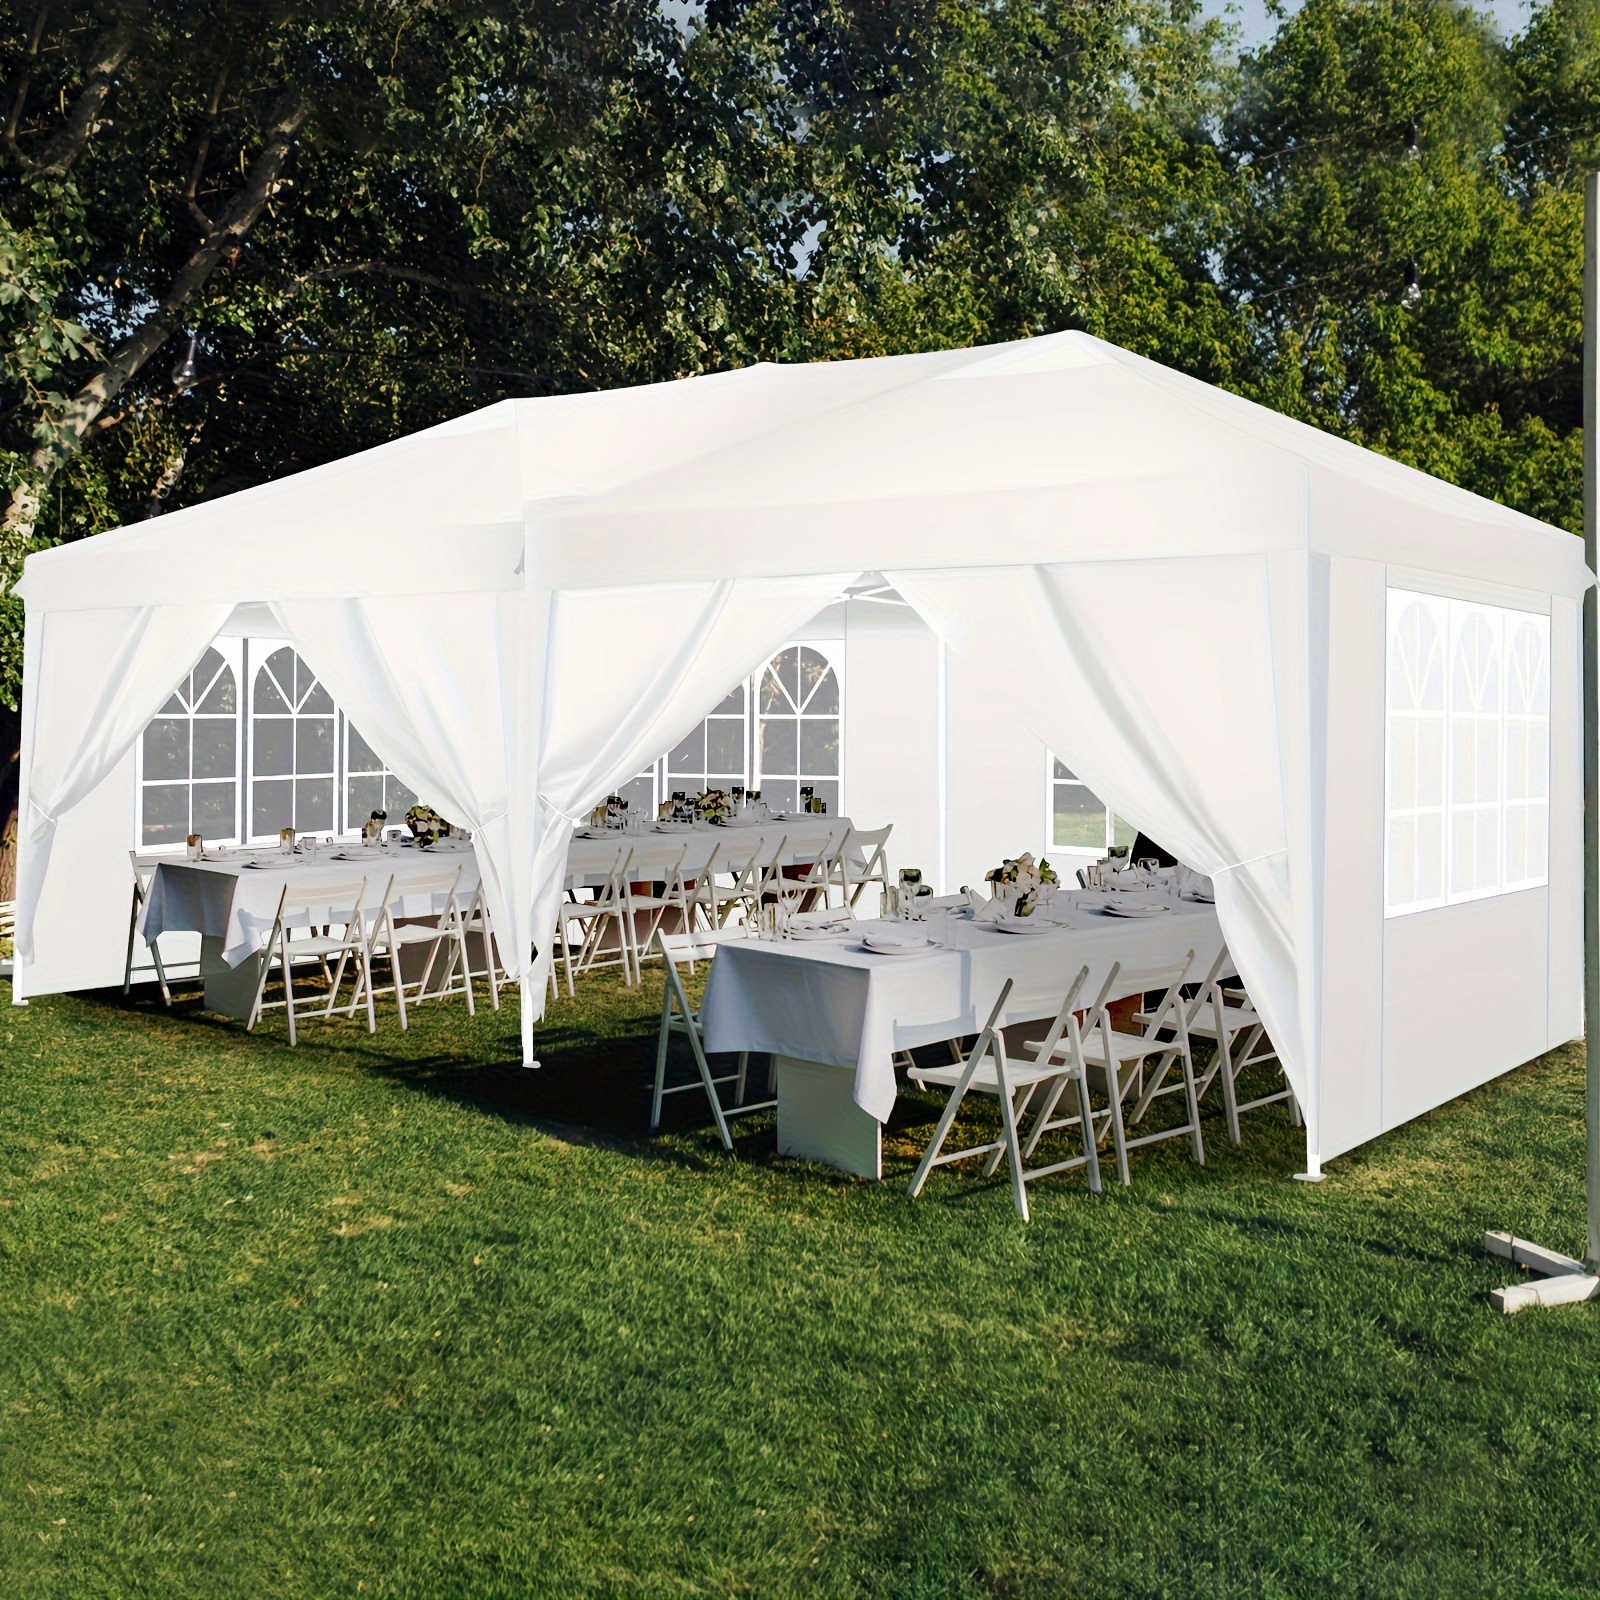 

Hoteel 10x20ft Canopy Tent With 6 Sidewalls Waterproof Commercial Instant Shelter Upf 50+